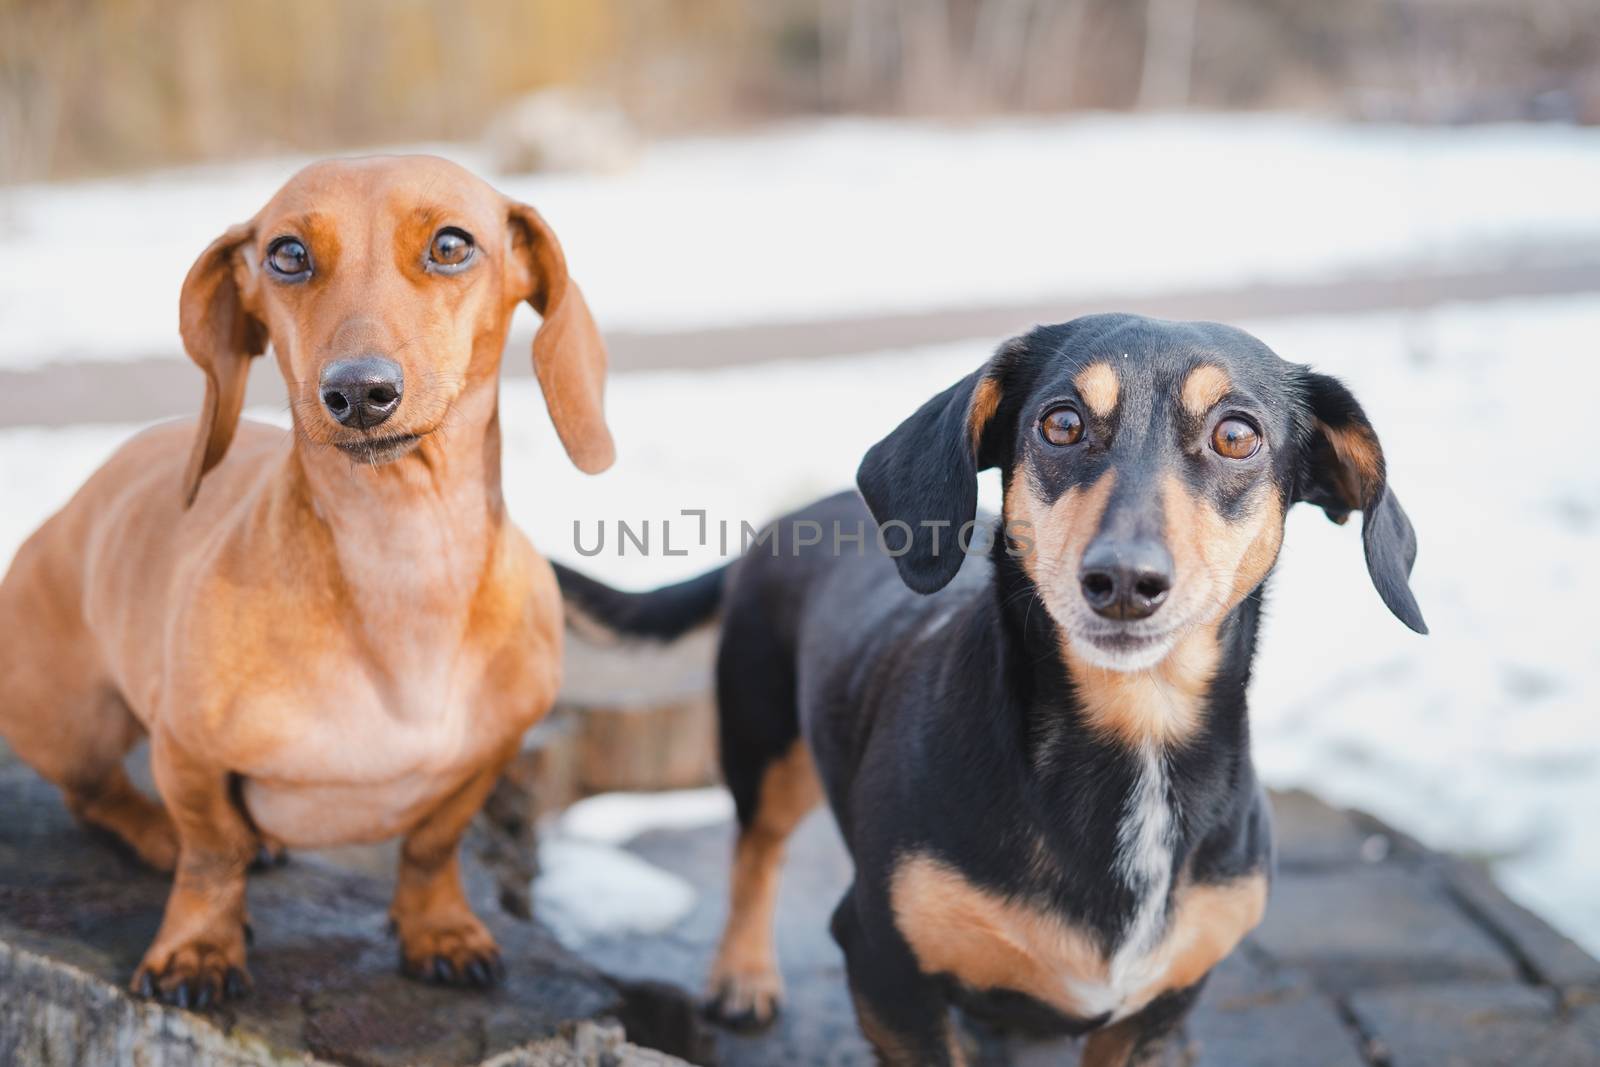 Two cute dachshund dogs outdoors. Portrait of lovely dogs at a park in cold winter season